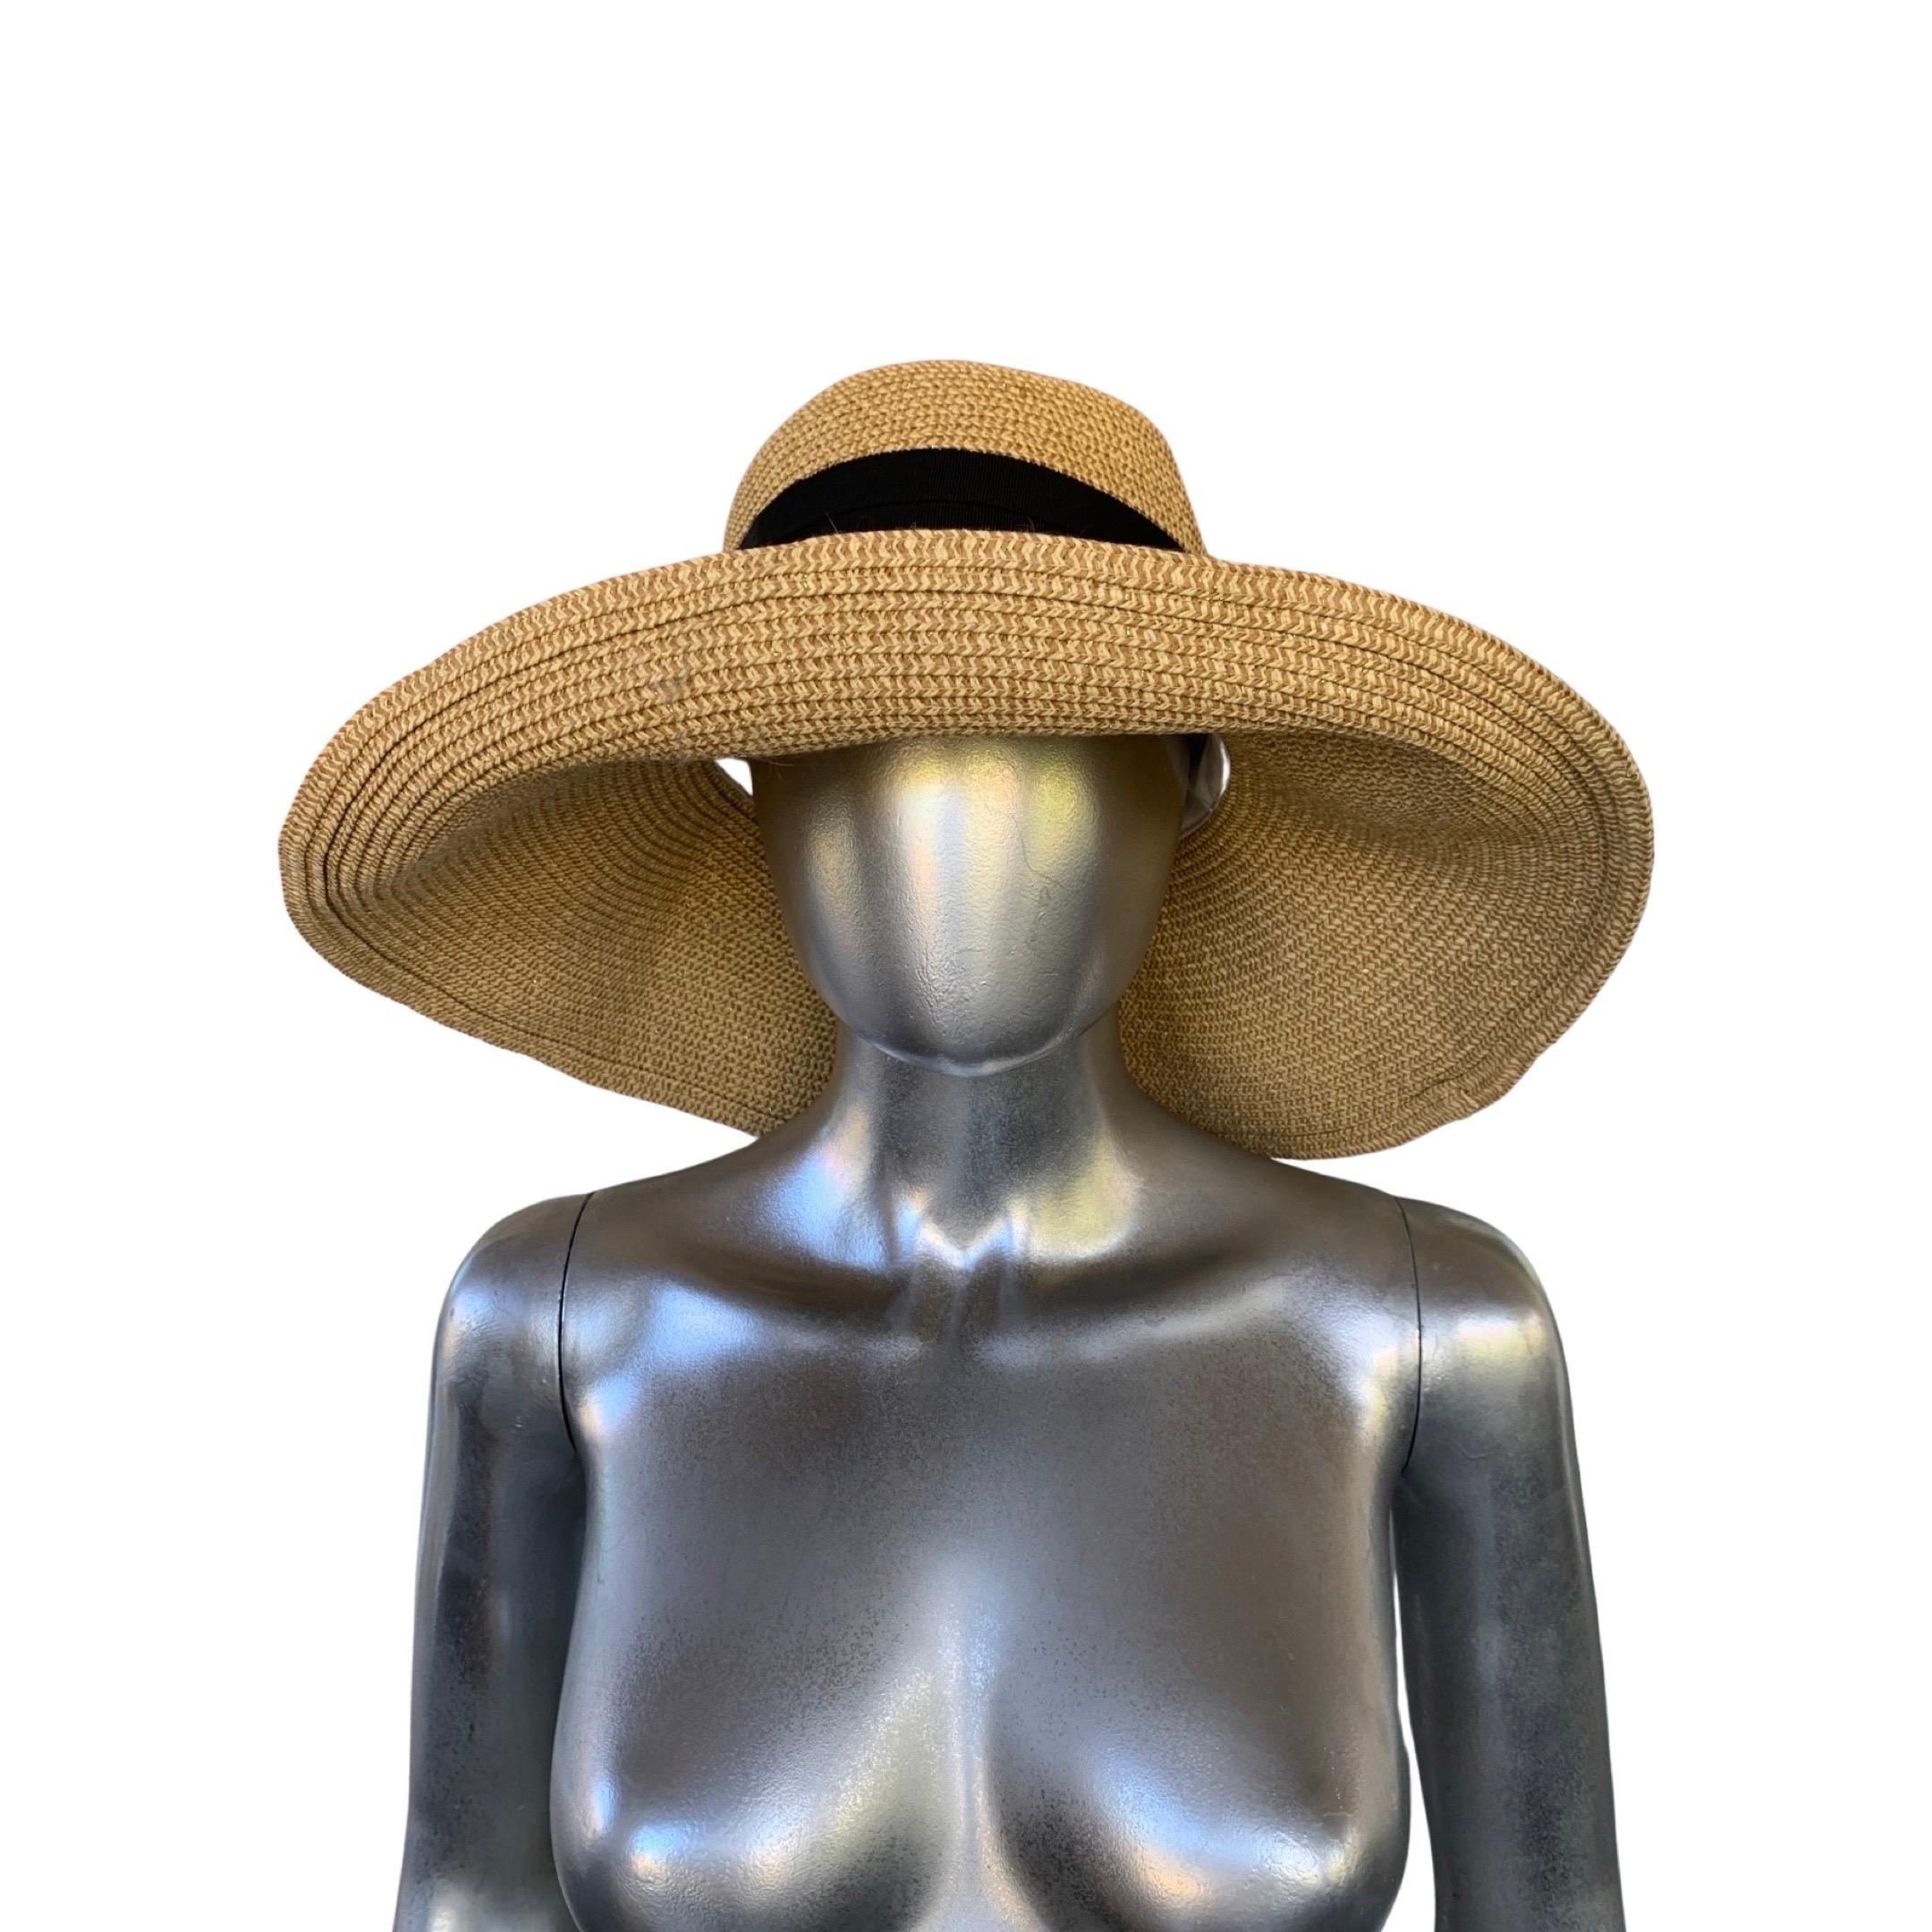 The hat that can go anywhere from the beach to a lunch party out. Gottex makes beautiful hats as part of their swim collection. This beauty looks so chic on. The brin has a built in wire that makes it wasy to be turned up, angled or worn down.